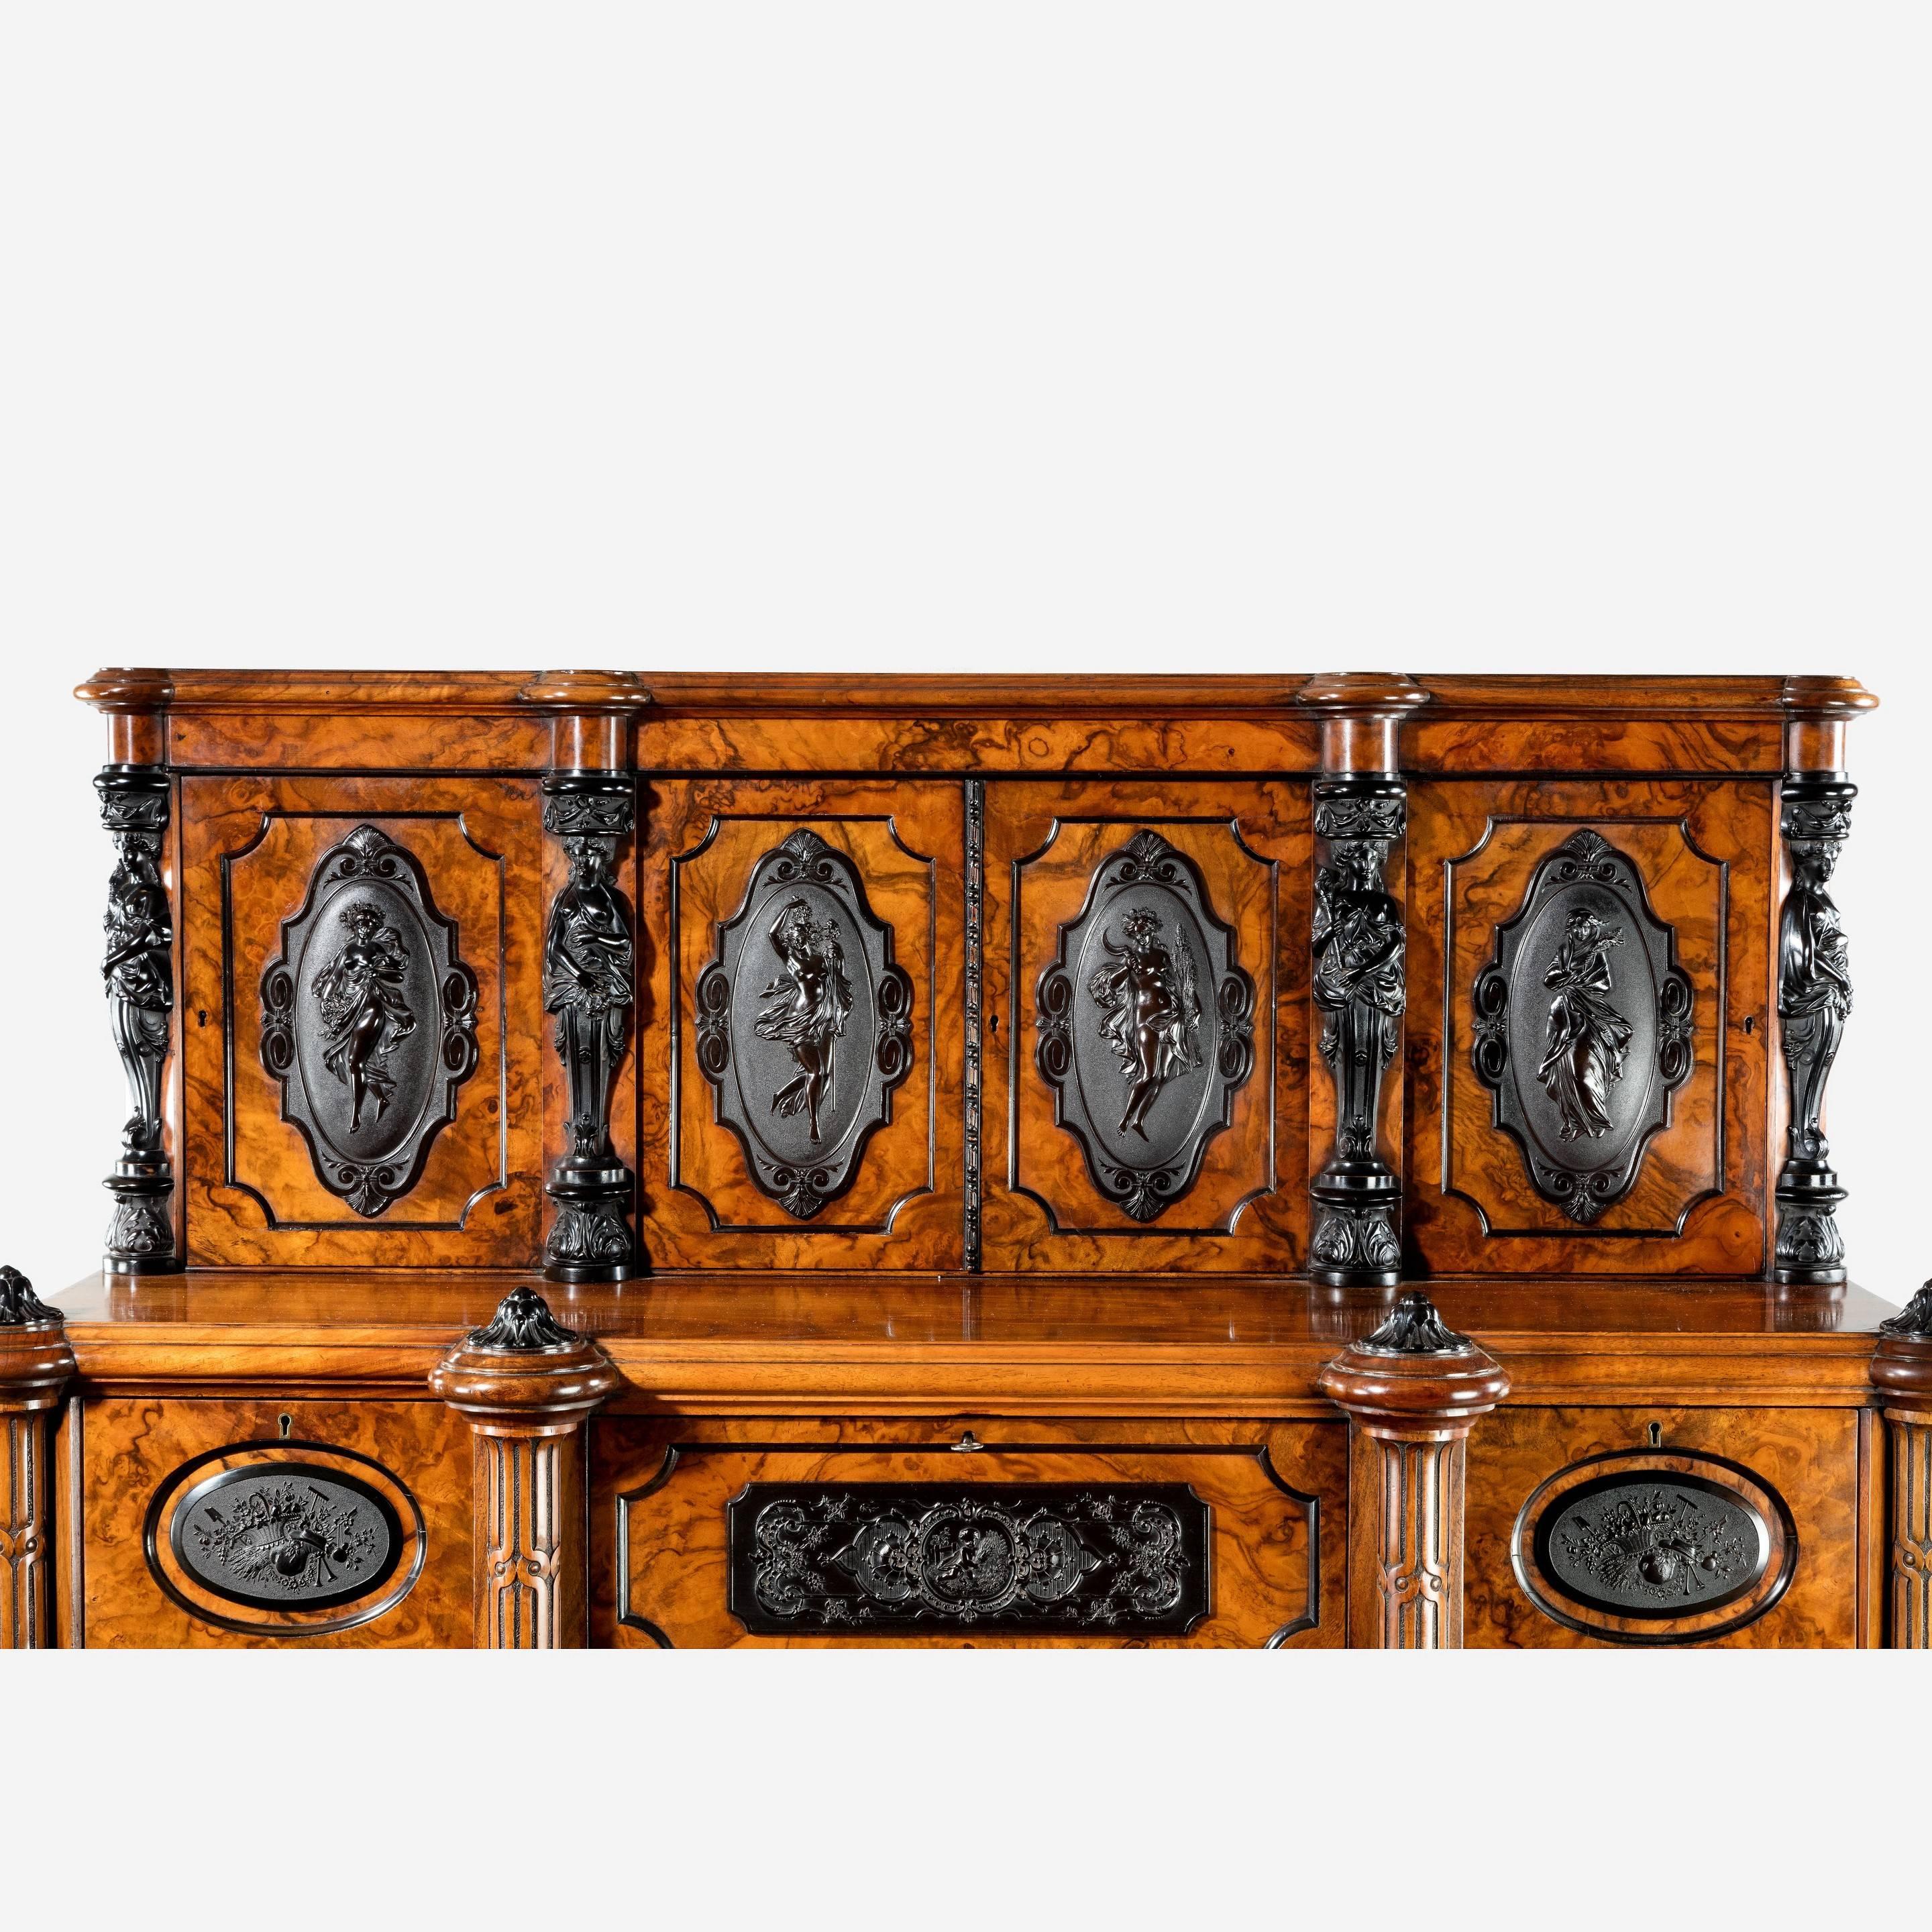 A superb quality burr walnut cabinet of upright rectangular form with three small drawers disguised in a frieze above three glazed cupboards between pilasters, the upper section comprising four smaller cupboards applied with black cartouches showing